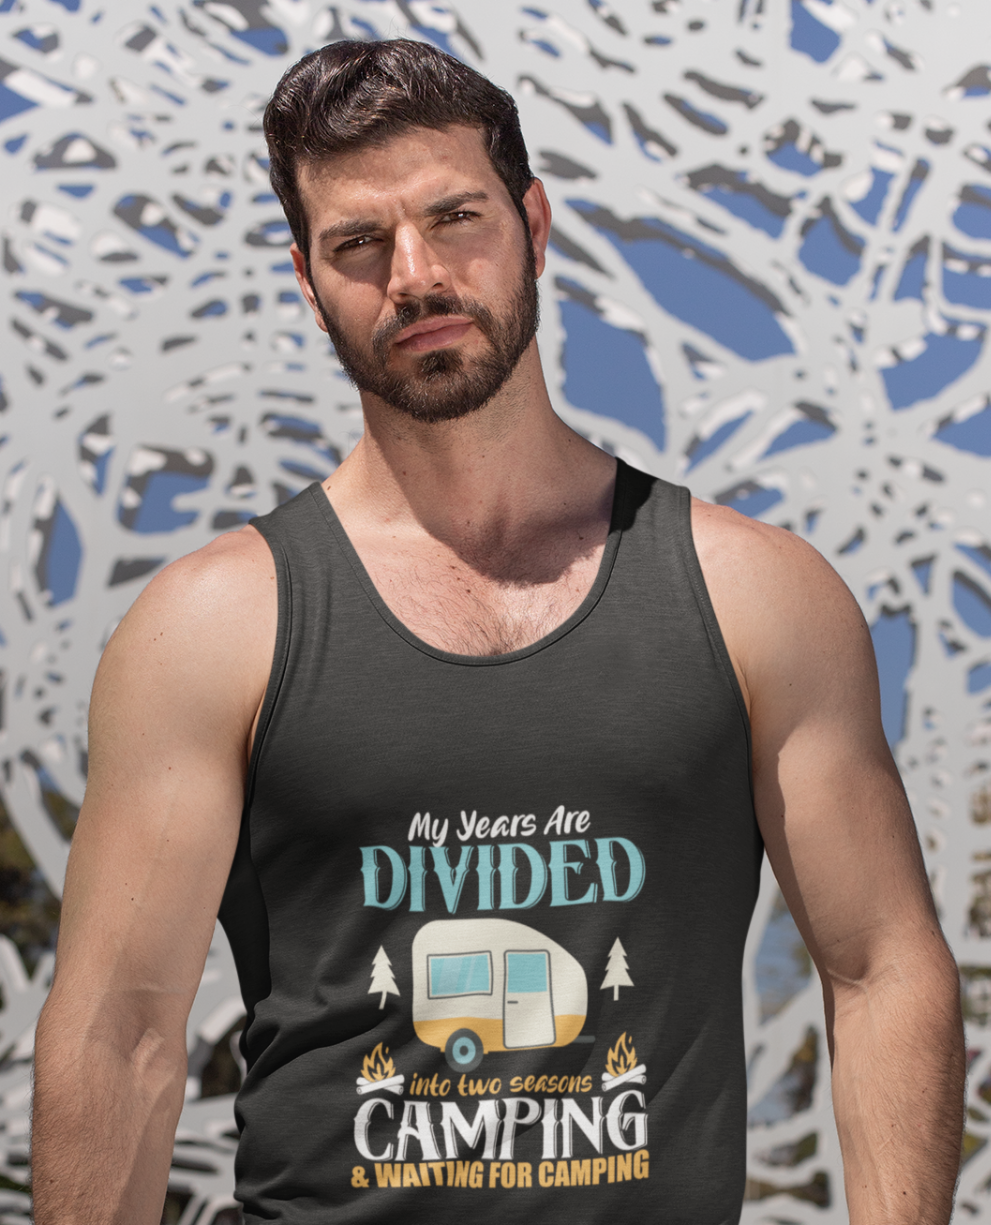 My ears are divided; 100% cotton tank top. Removable tag for comfort